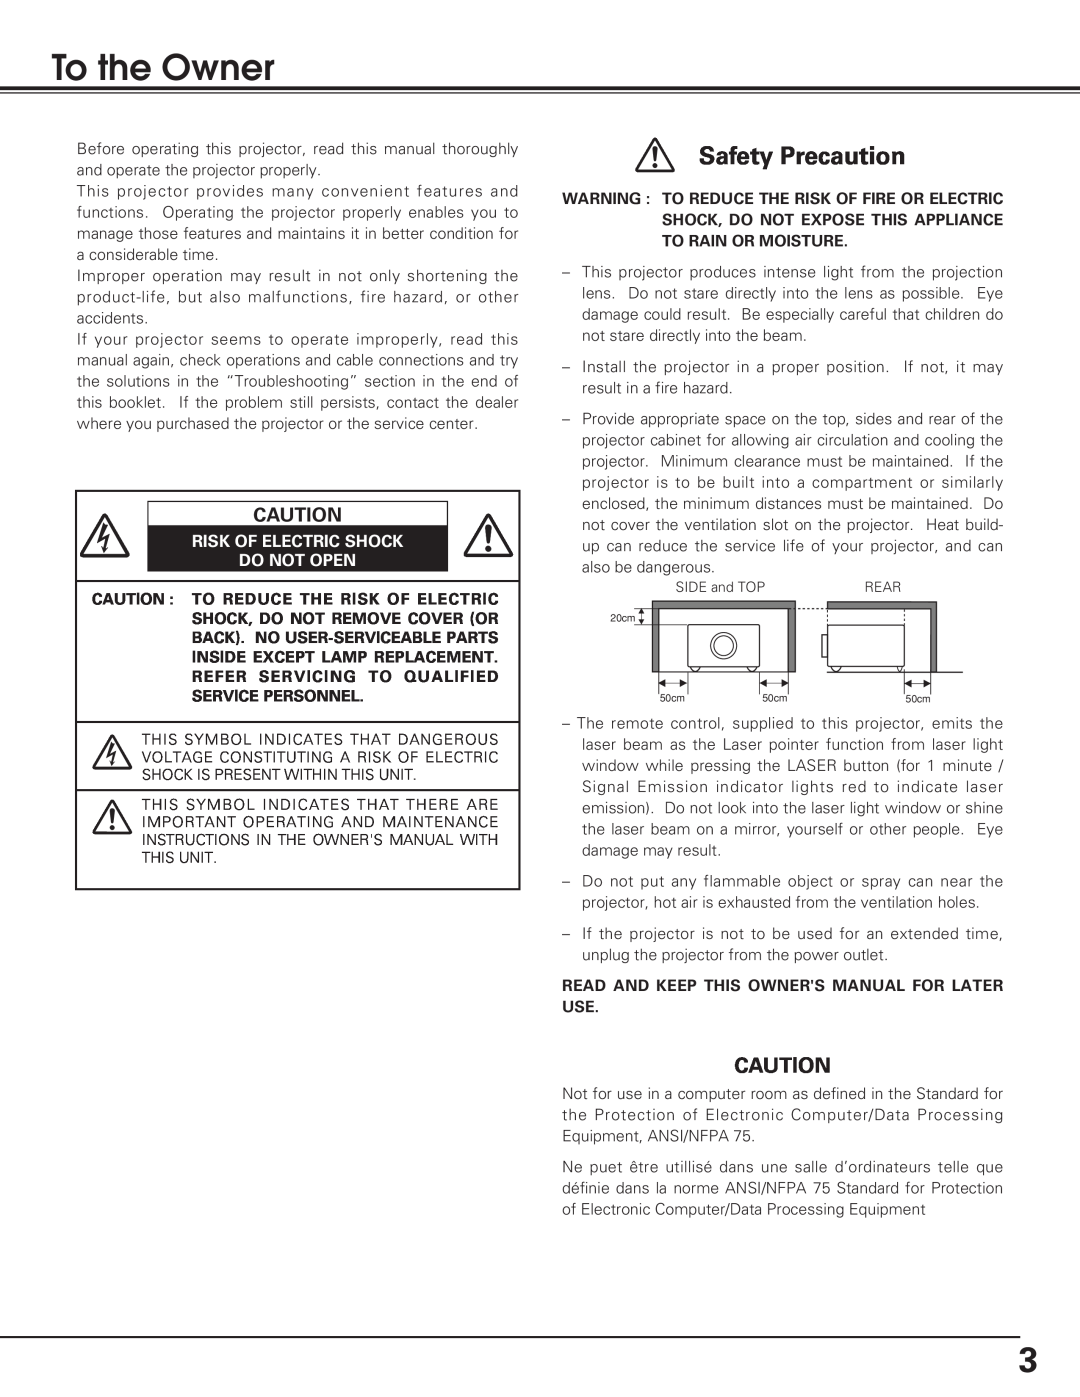 Sanyo PLC-SL20 owner manual To the Owner, Safety Precaution, Risk Of Electric Shock Do Not Open 